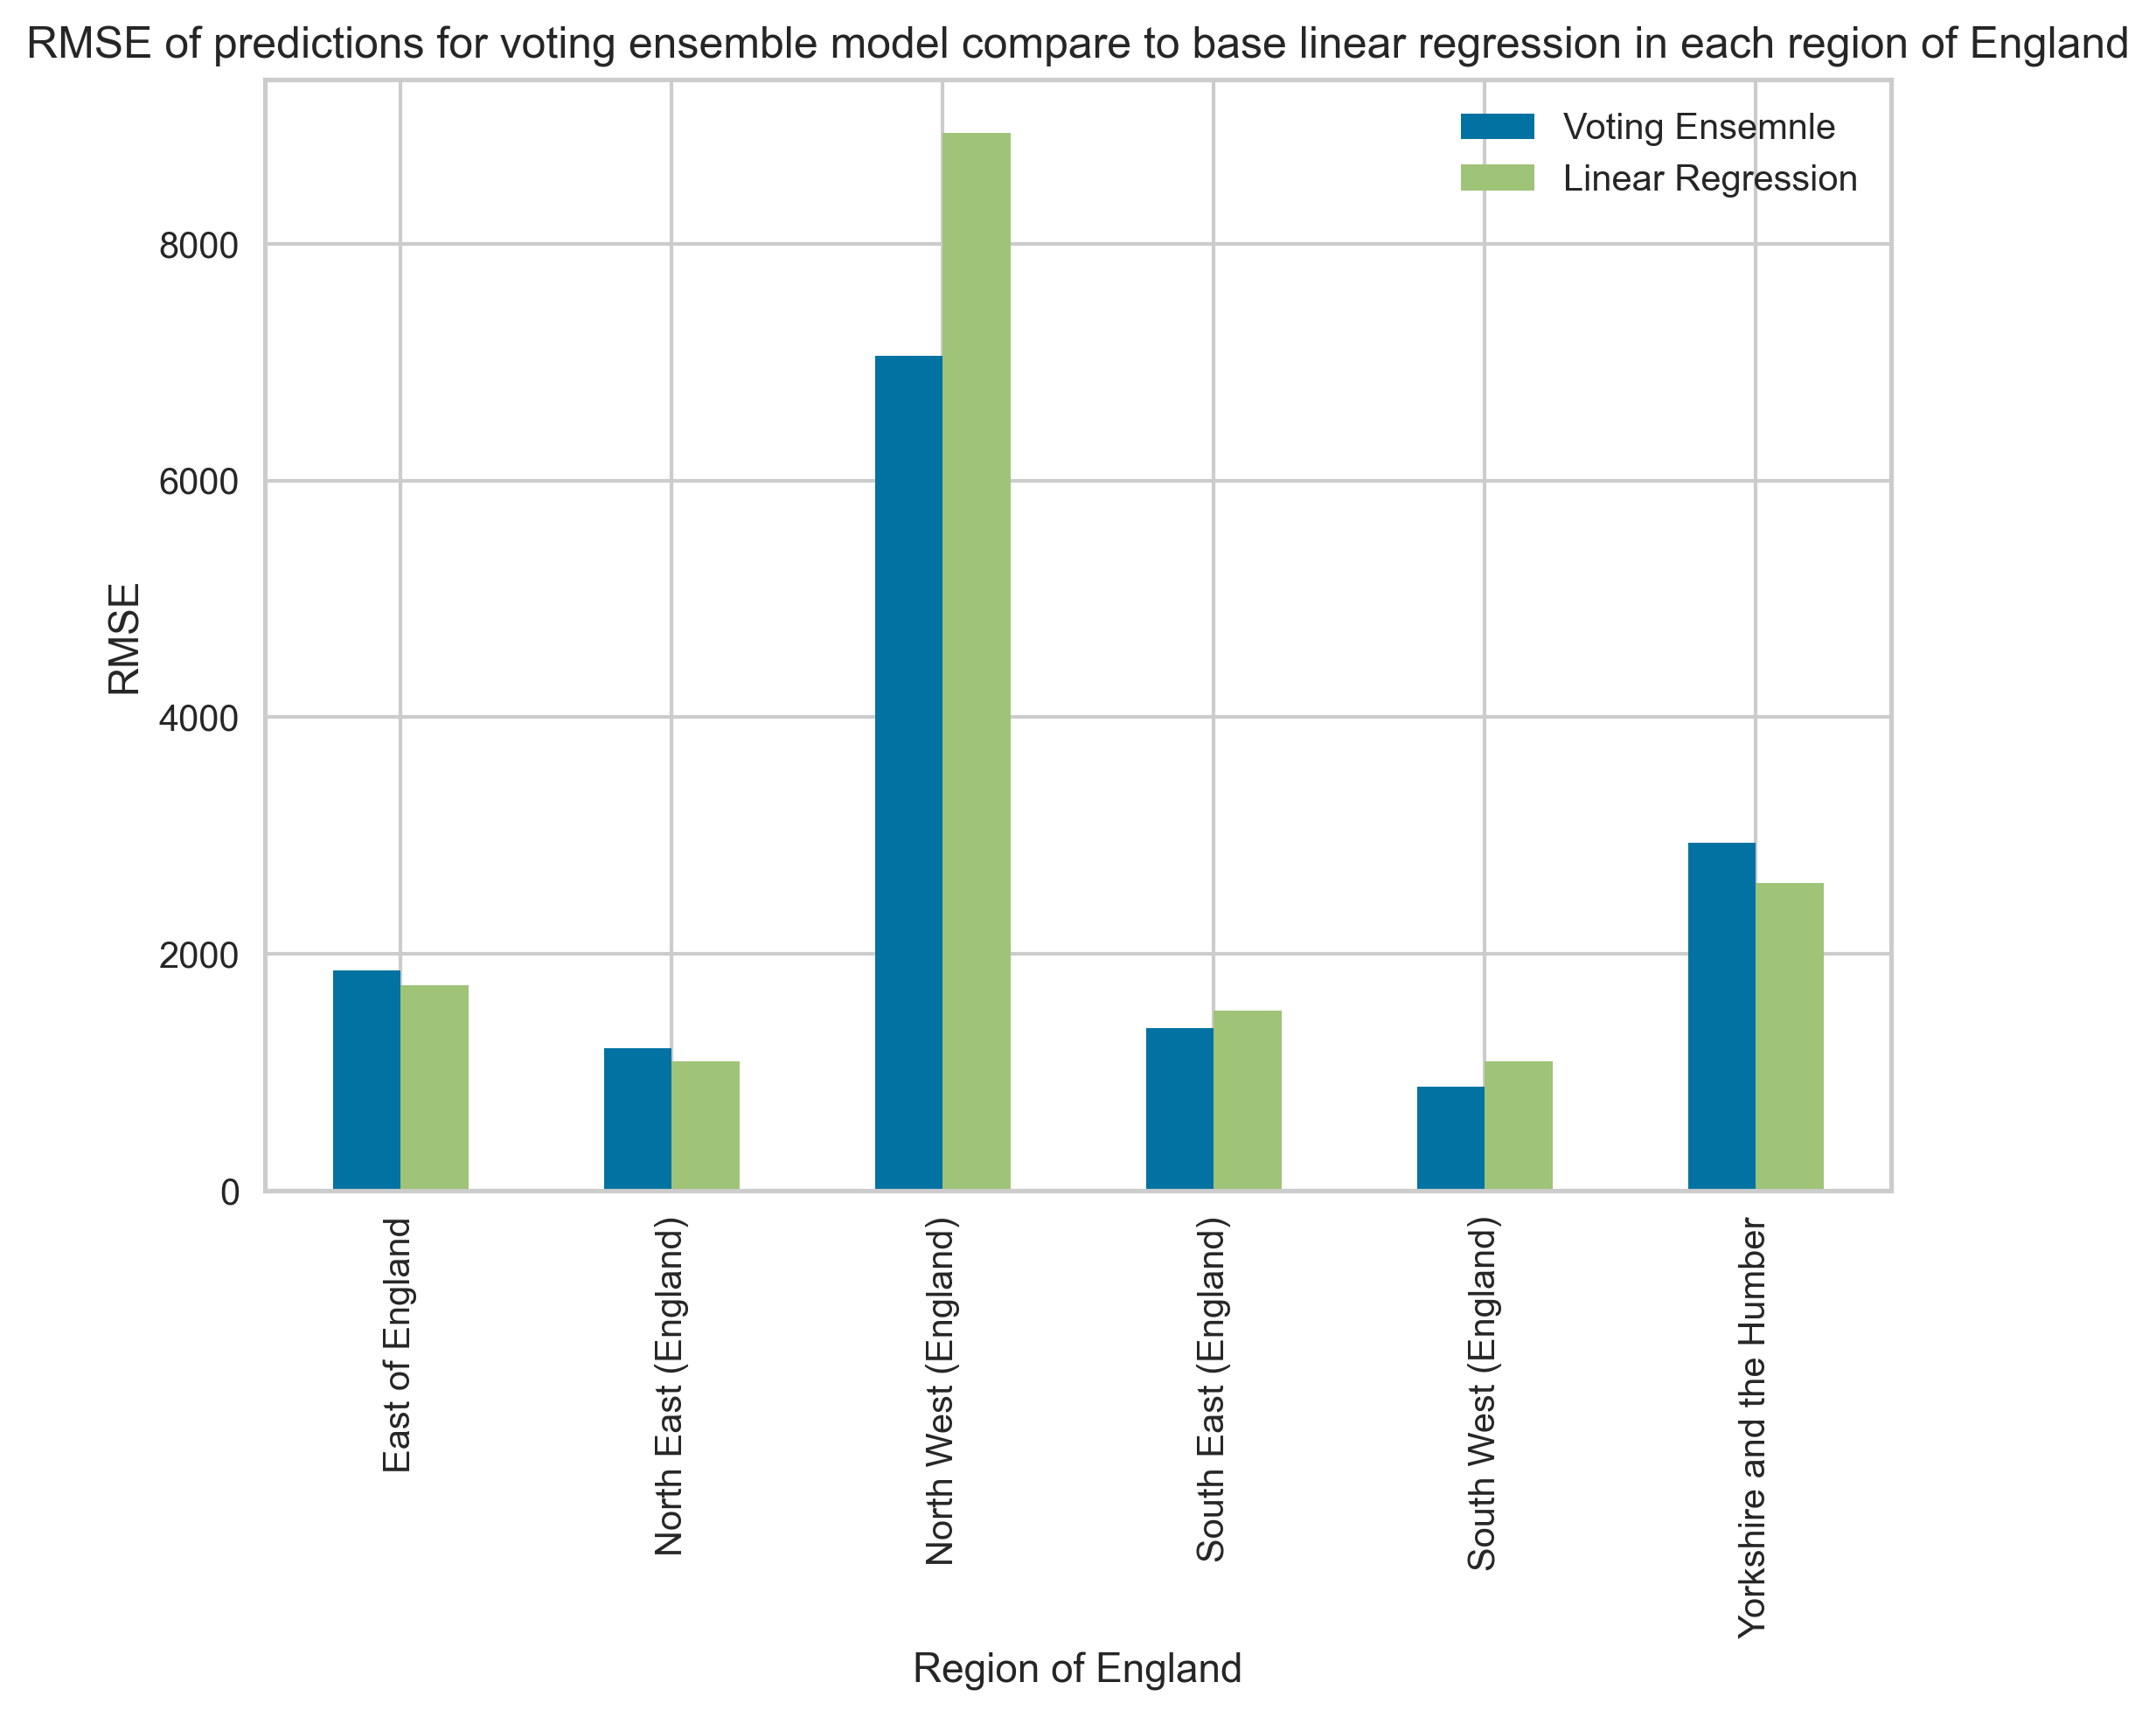 Figure 23: Number of people monitoring sites grouped by different regions.